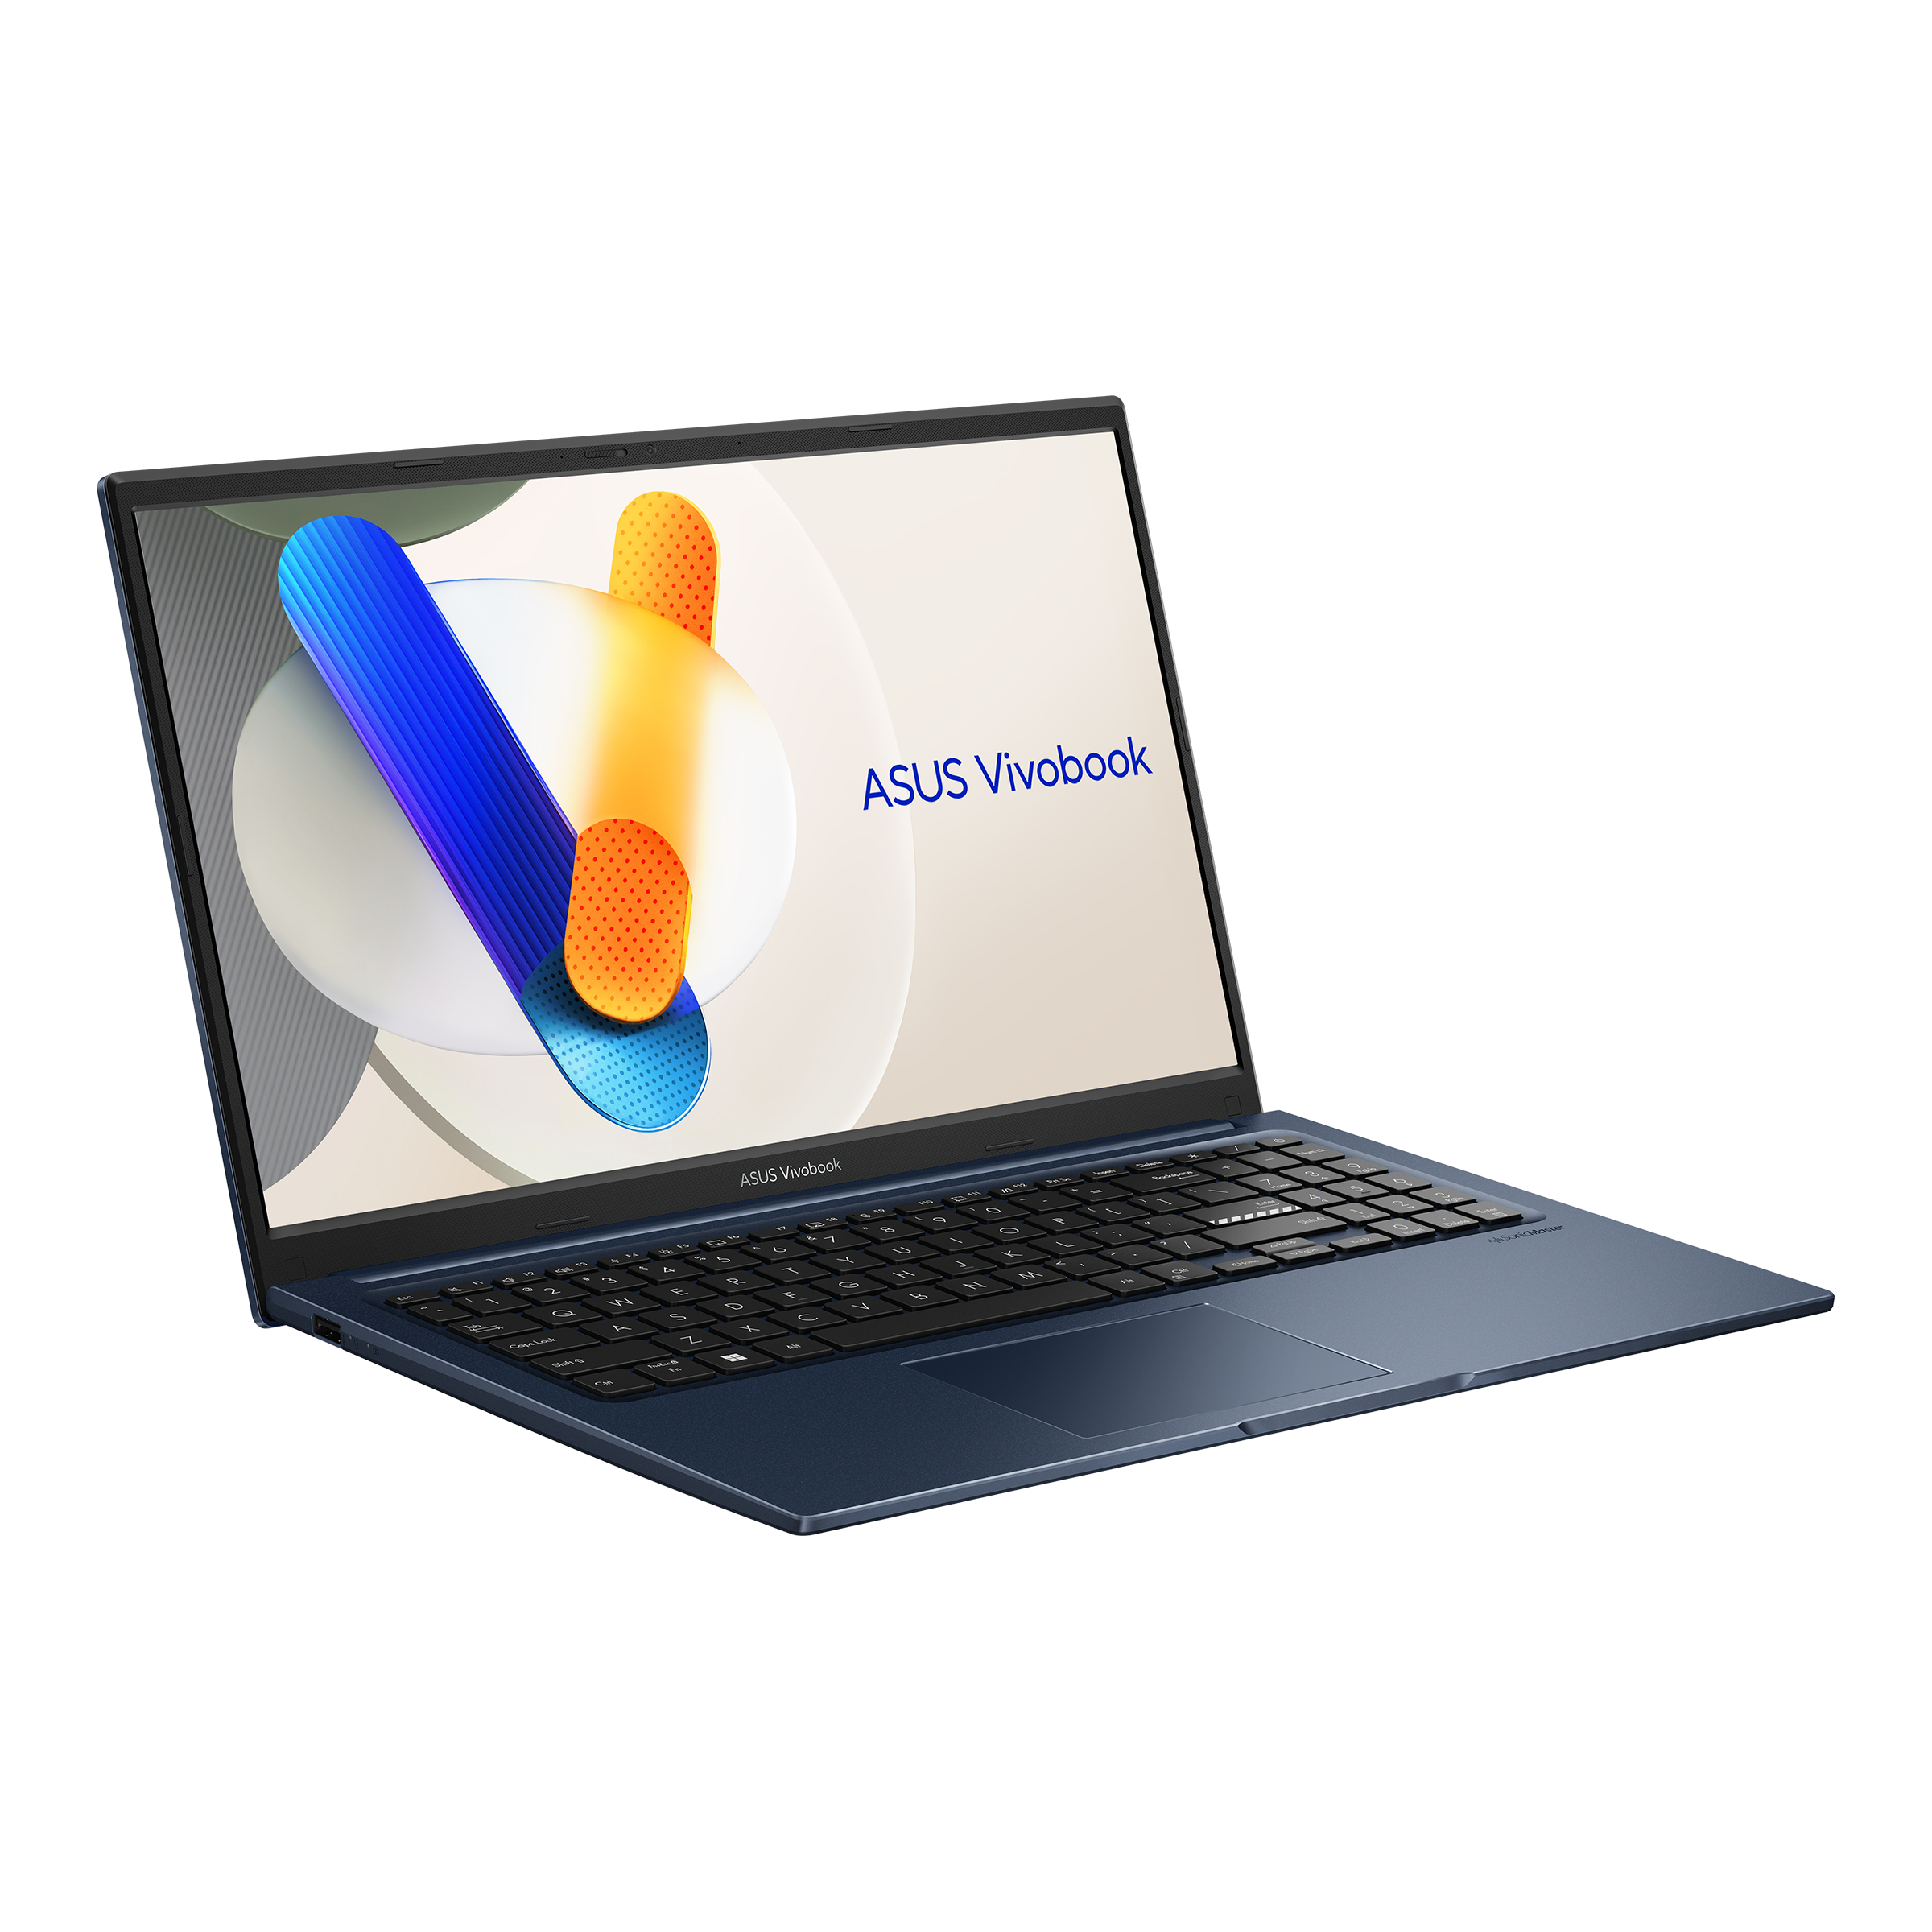 ASUS Vivobook 15 (X1504)｜Laptops For Home｜ASUS Global